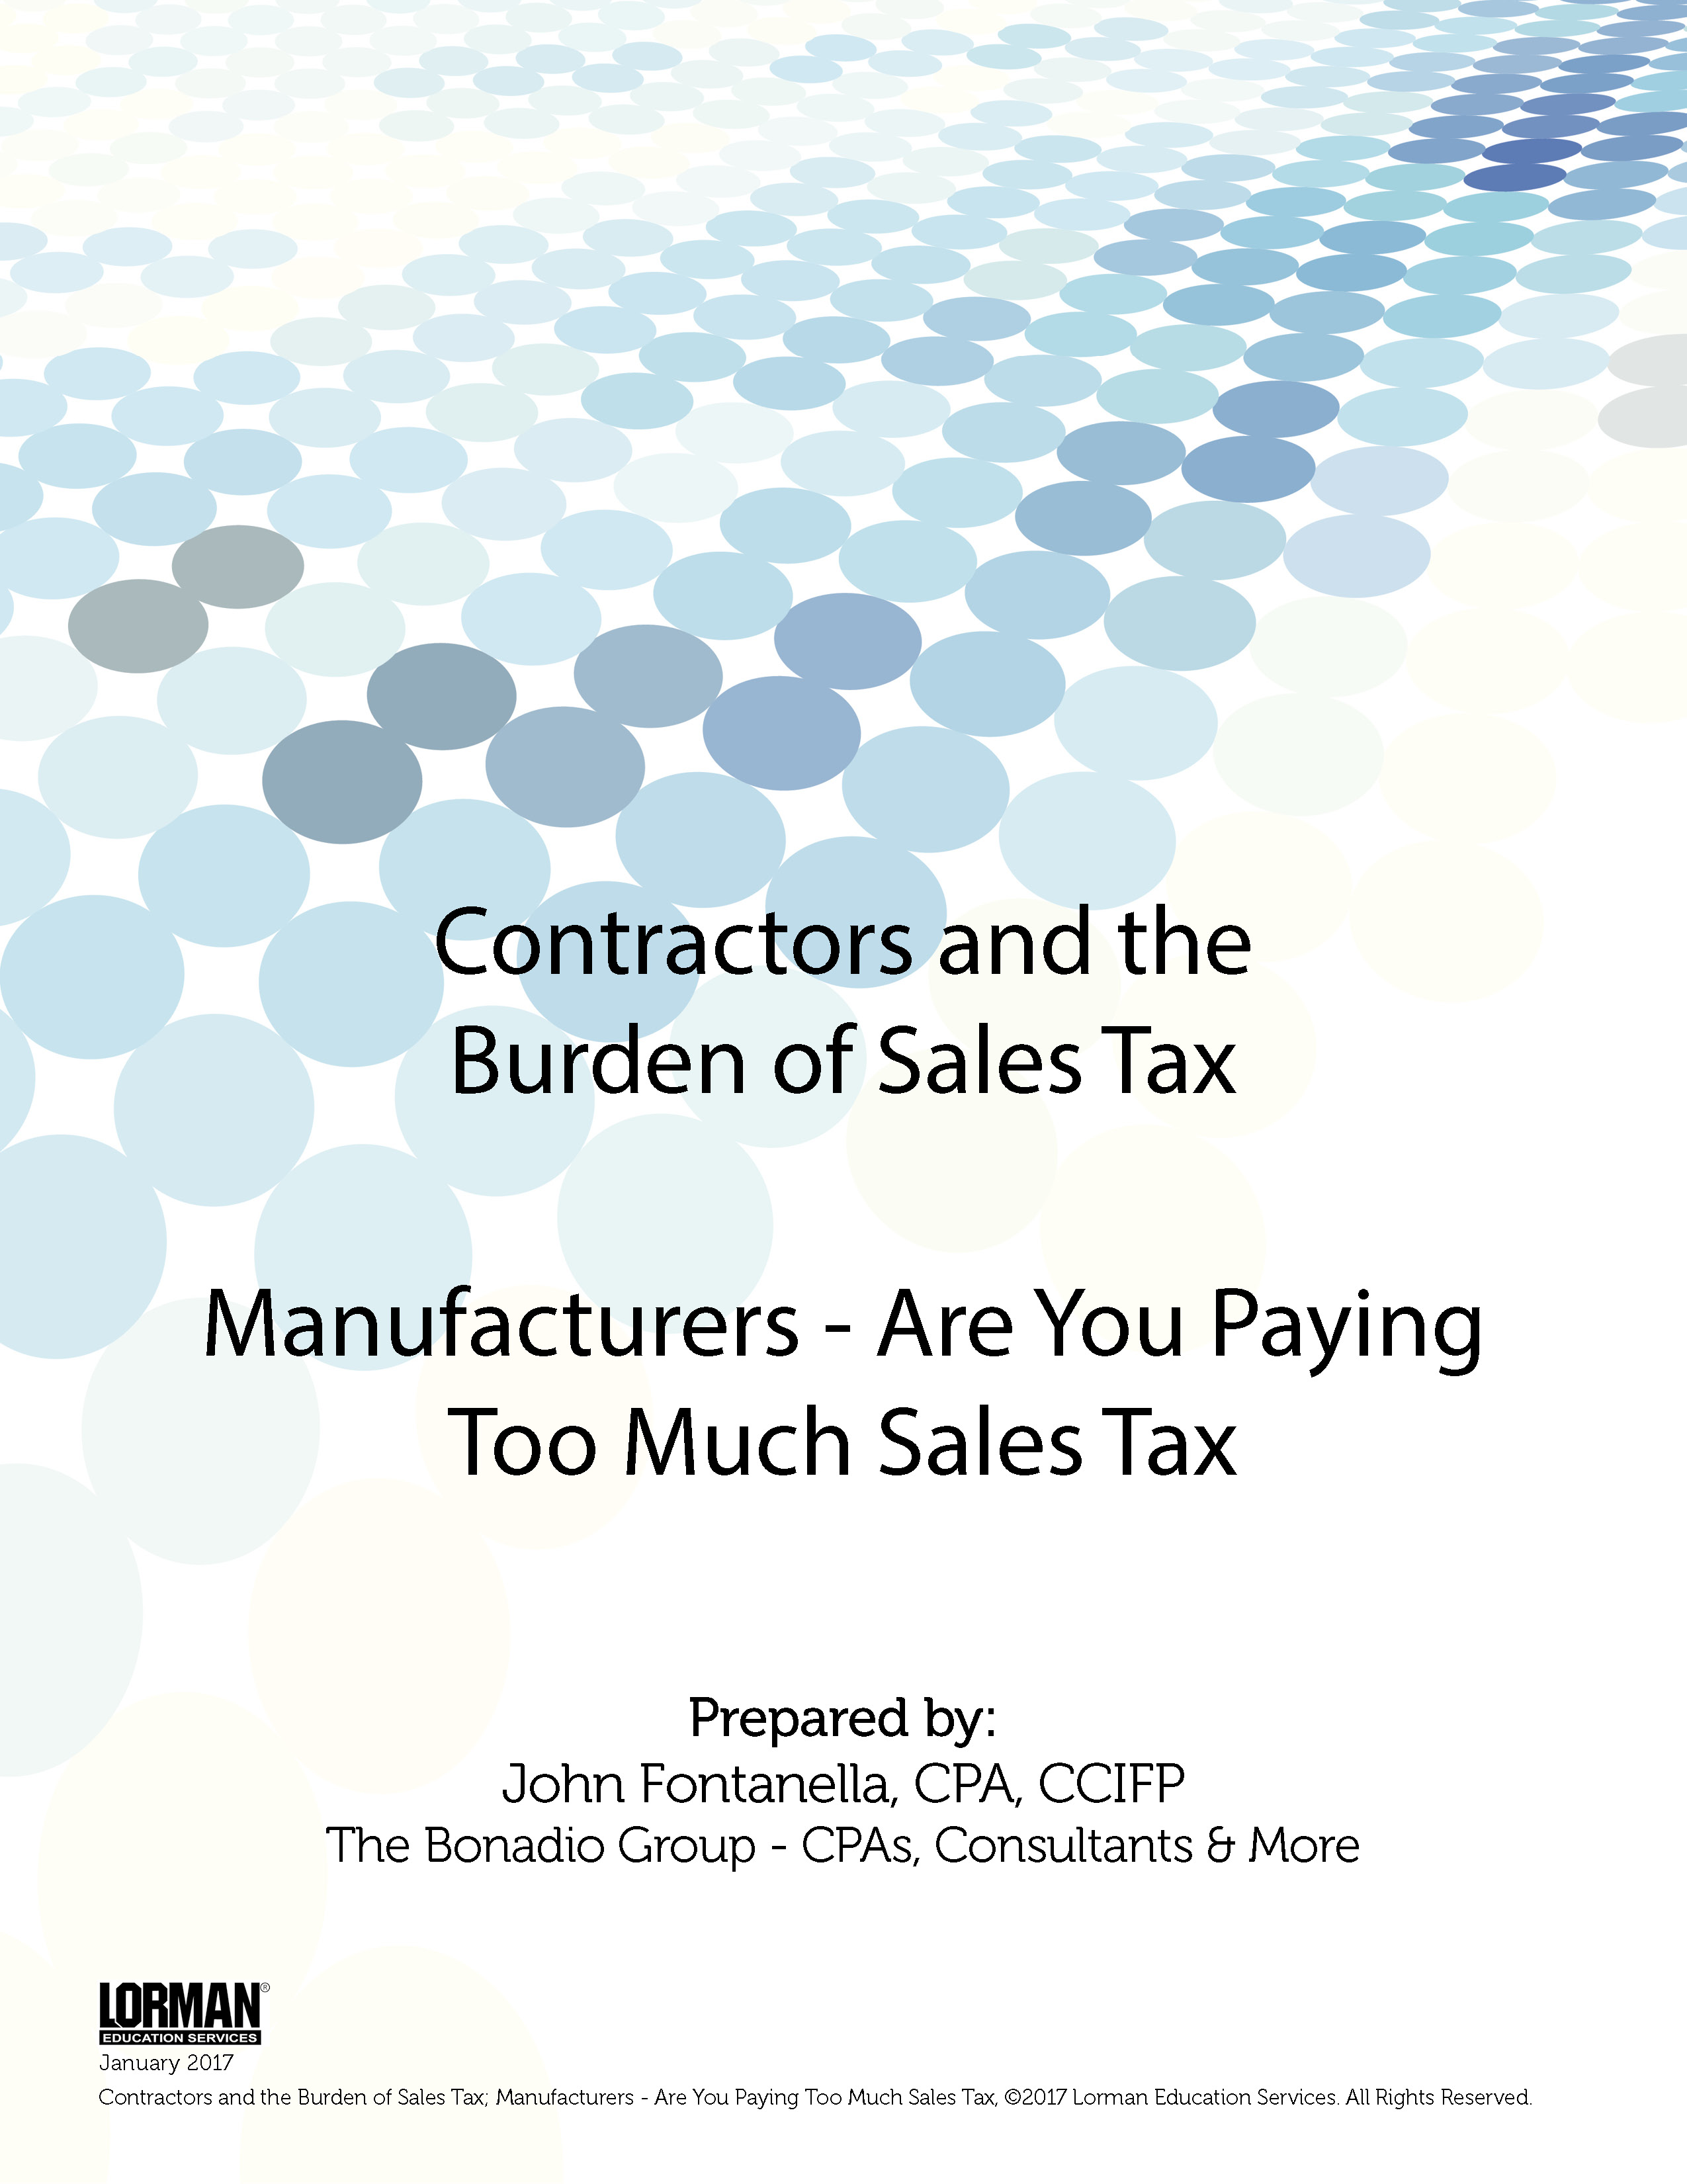 Contractors and the Burden of Sales Tax; Manufacturers - Are You Paying Too Much Sales Tax